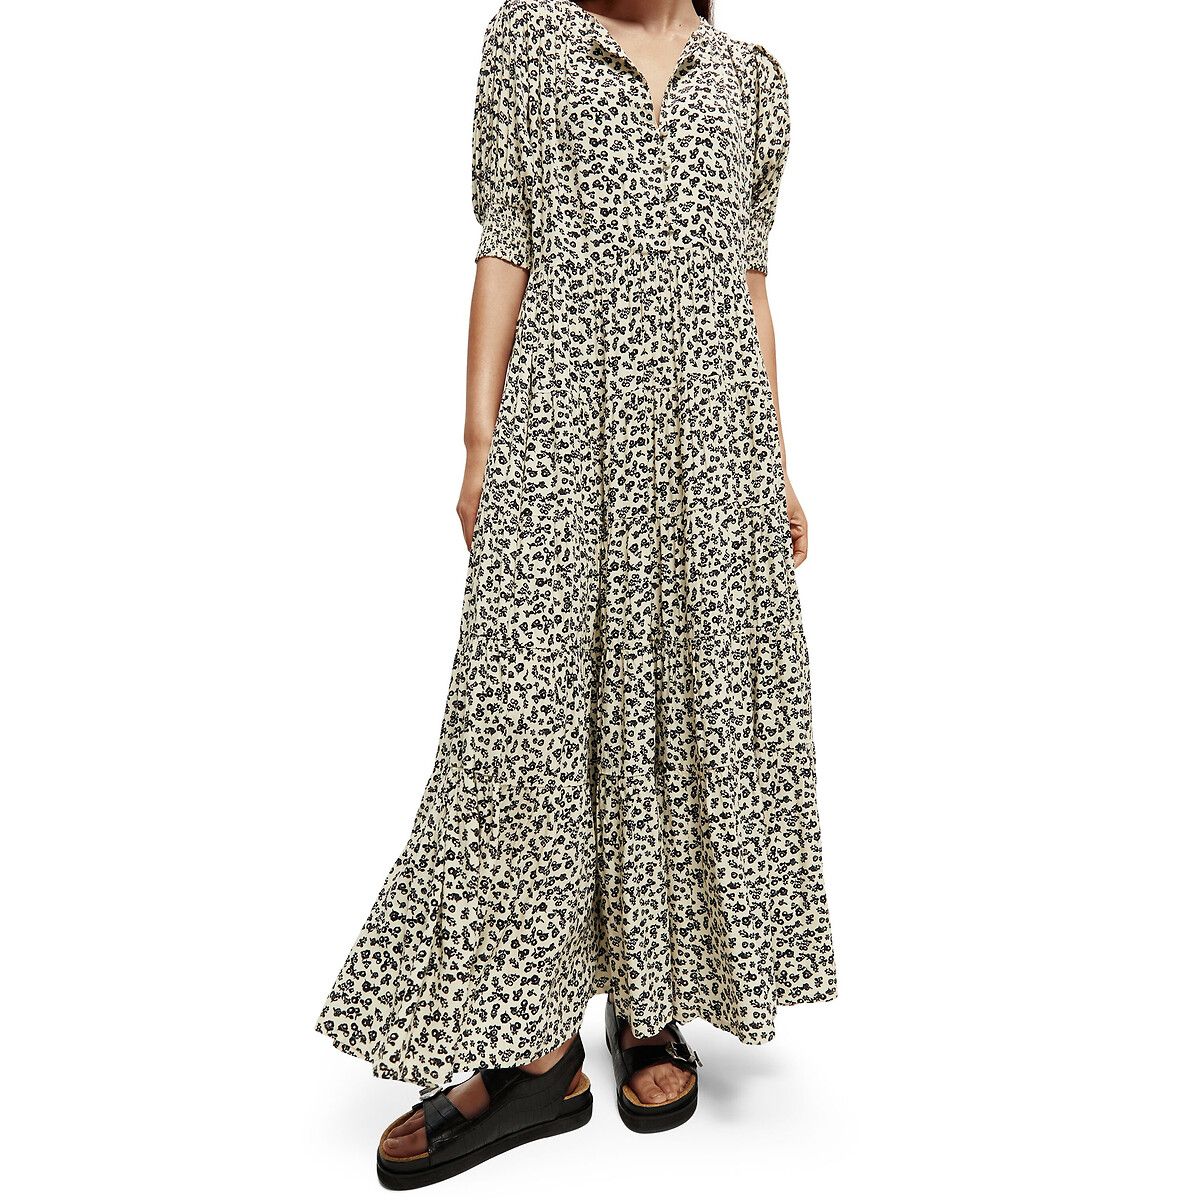 Printed Maxi Dress with Short Sleeves | La Redoute (UK)